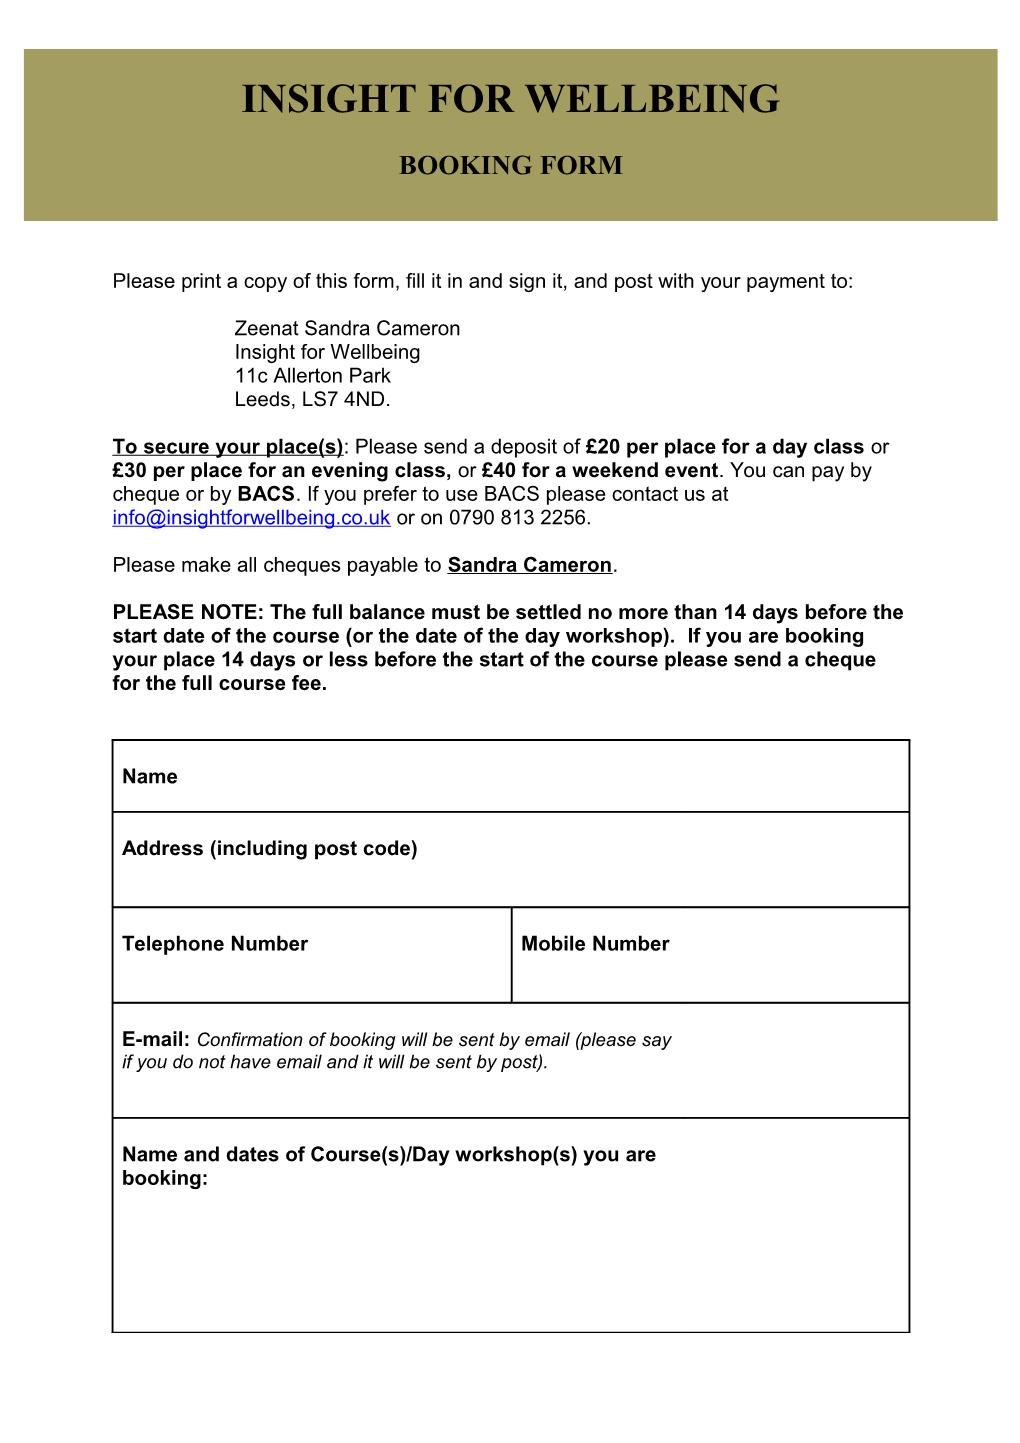 Please Print a Copy of This Form, Fill It in and Sign It, and Post with Your Payment To